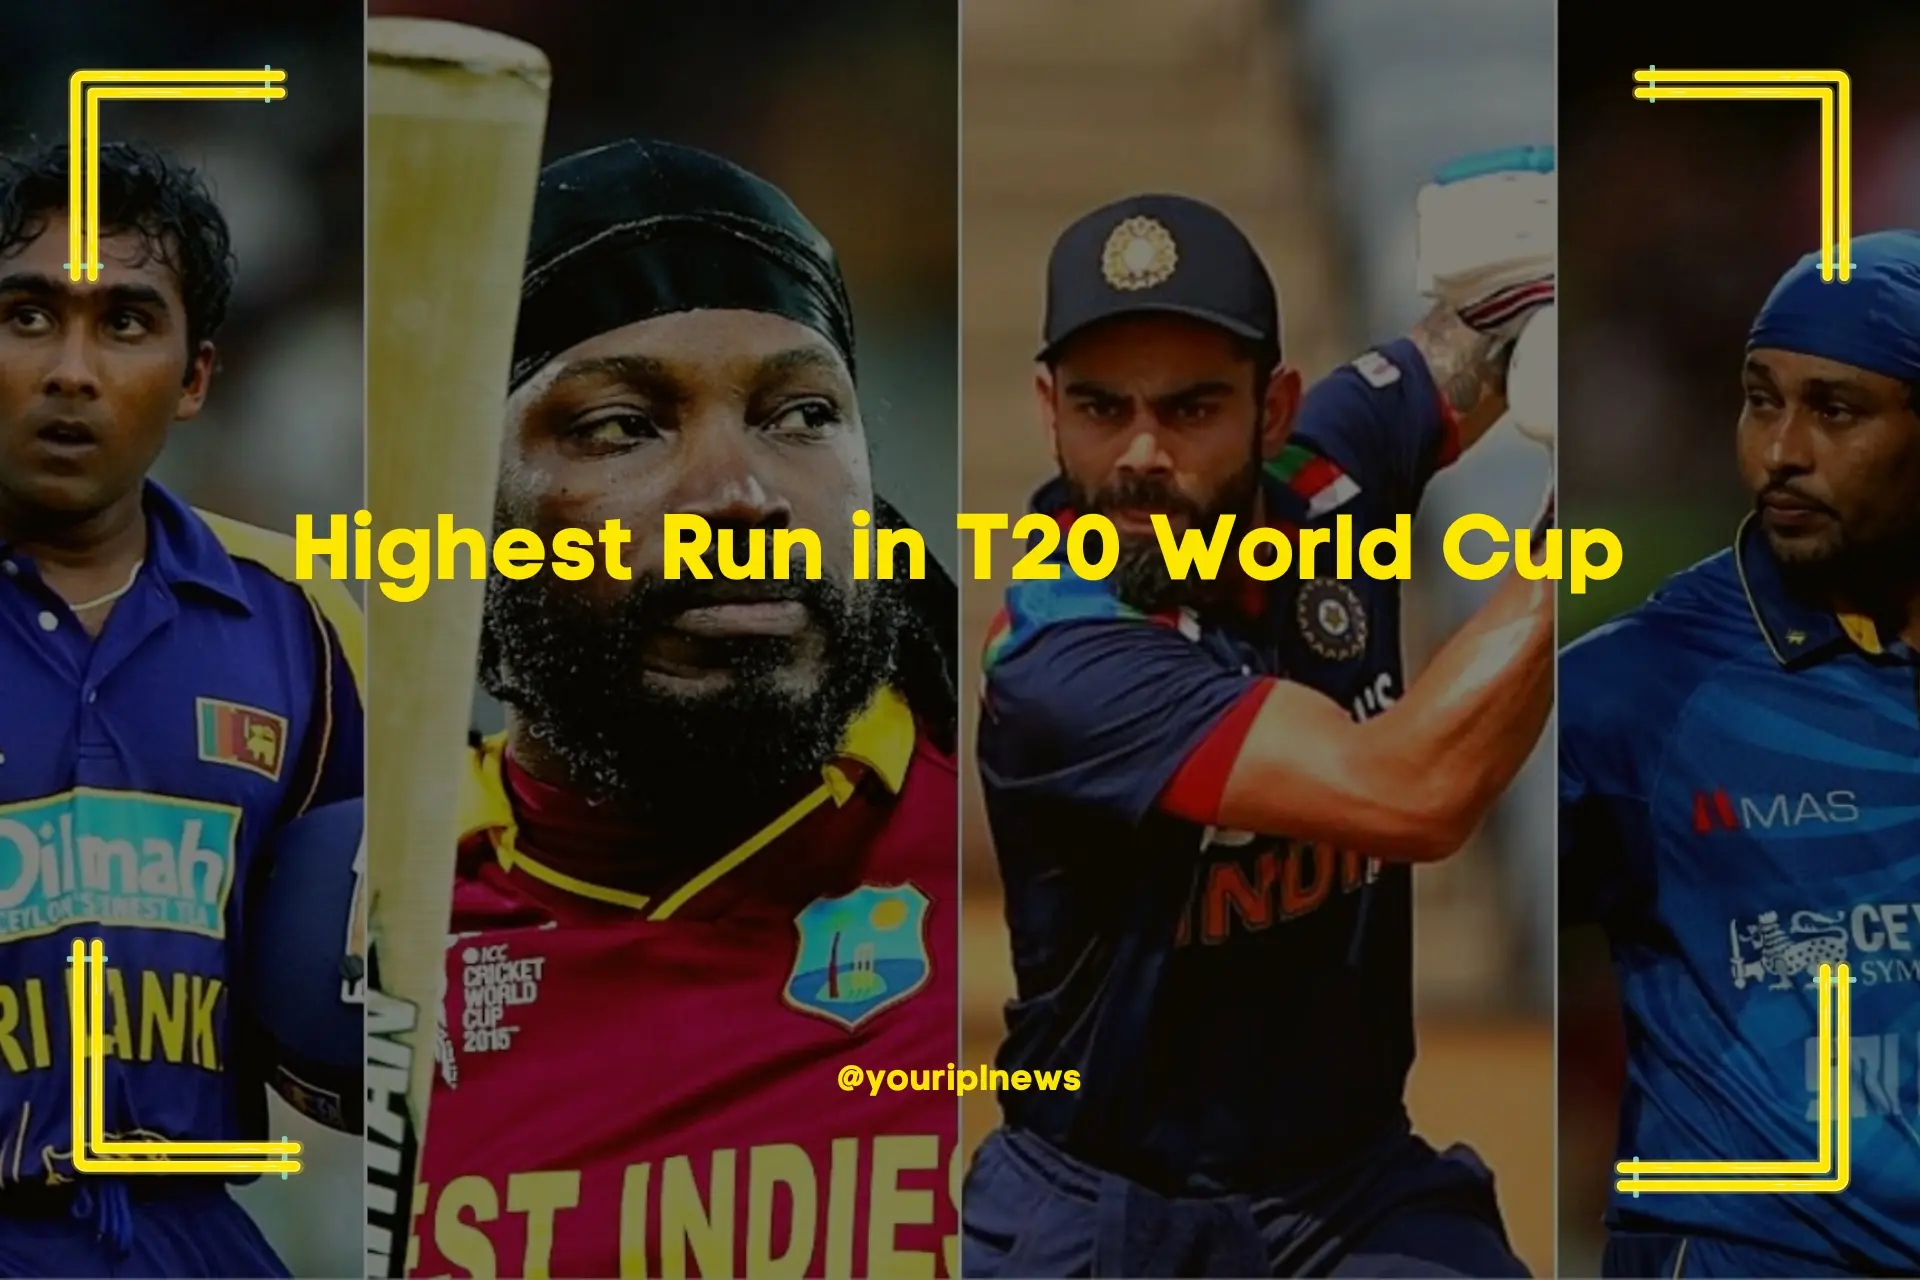 Highest Run in T20 World Cup